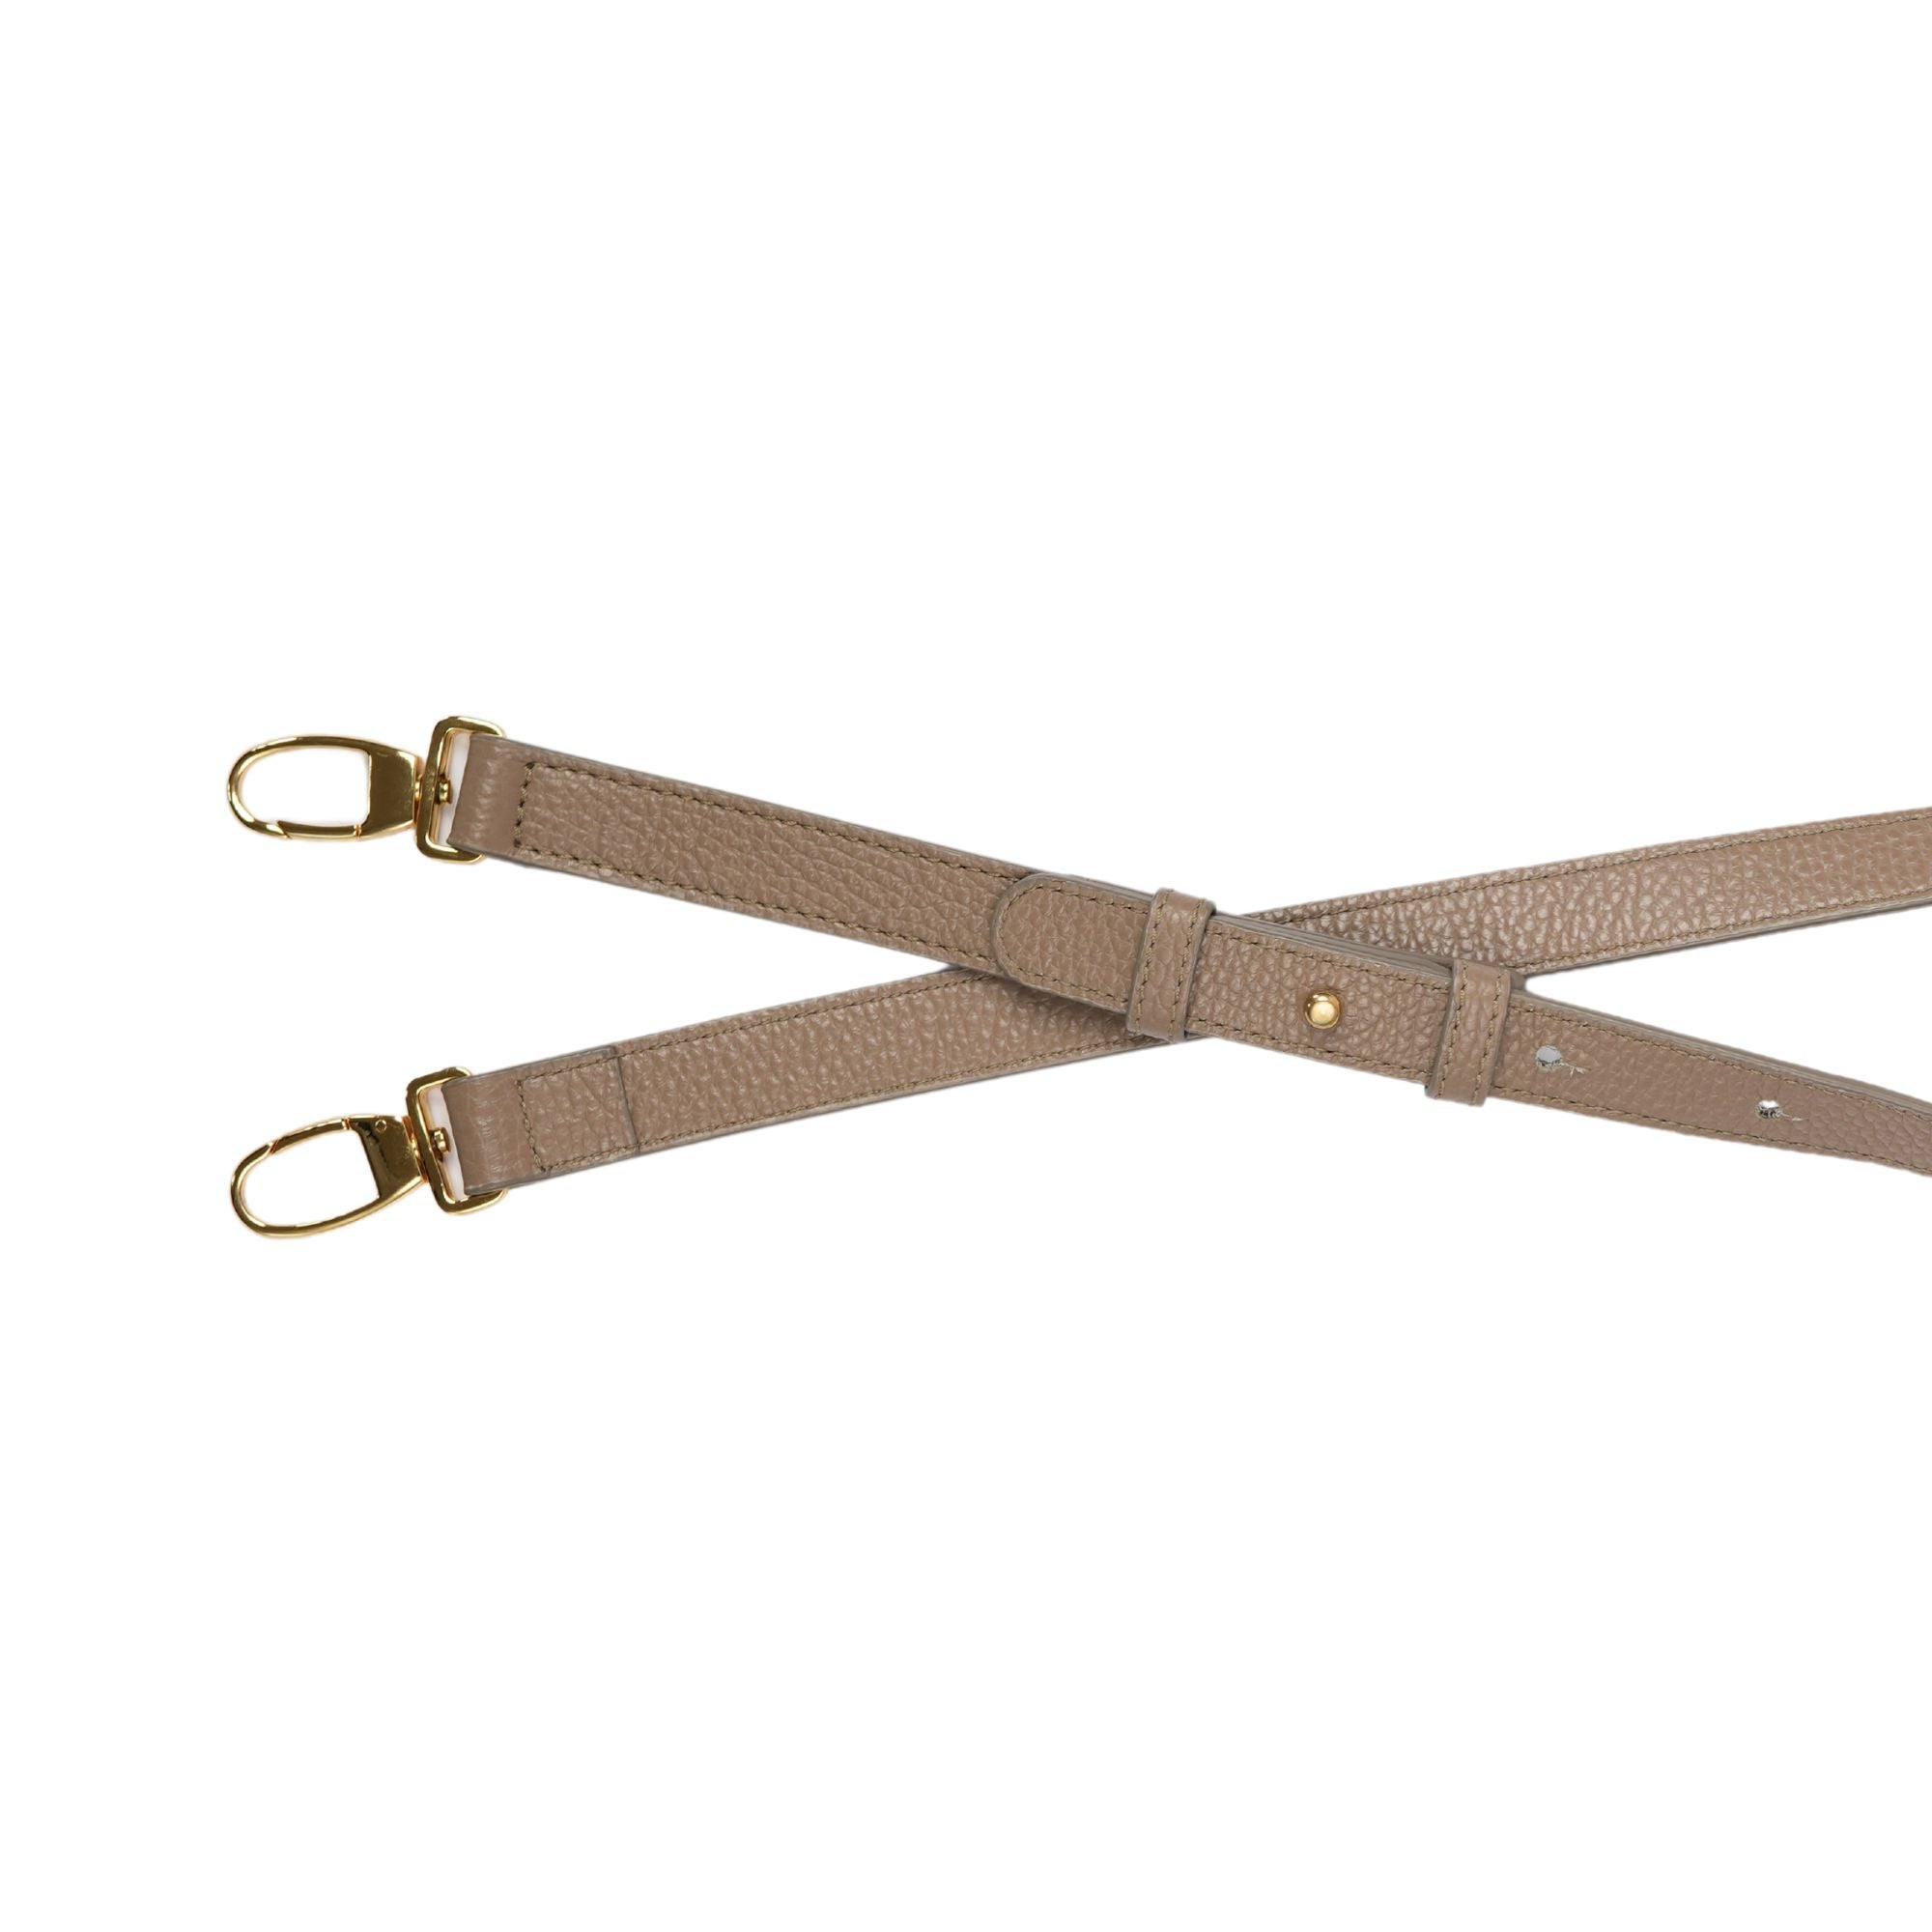 AMELI Zurich | LEATHER STRAP | Greige | Soft Grain Leather | Front